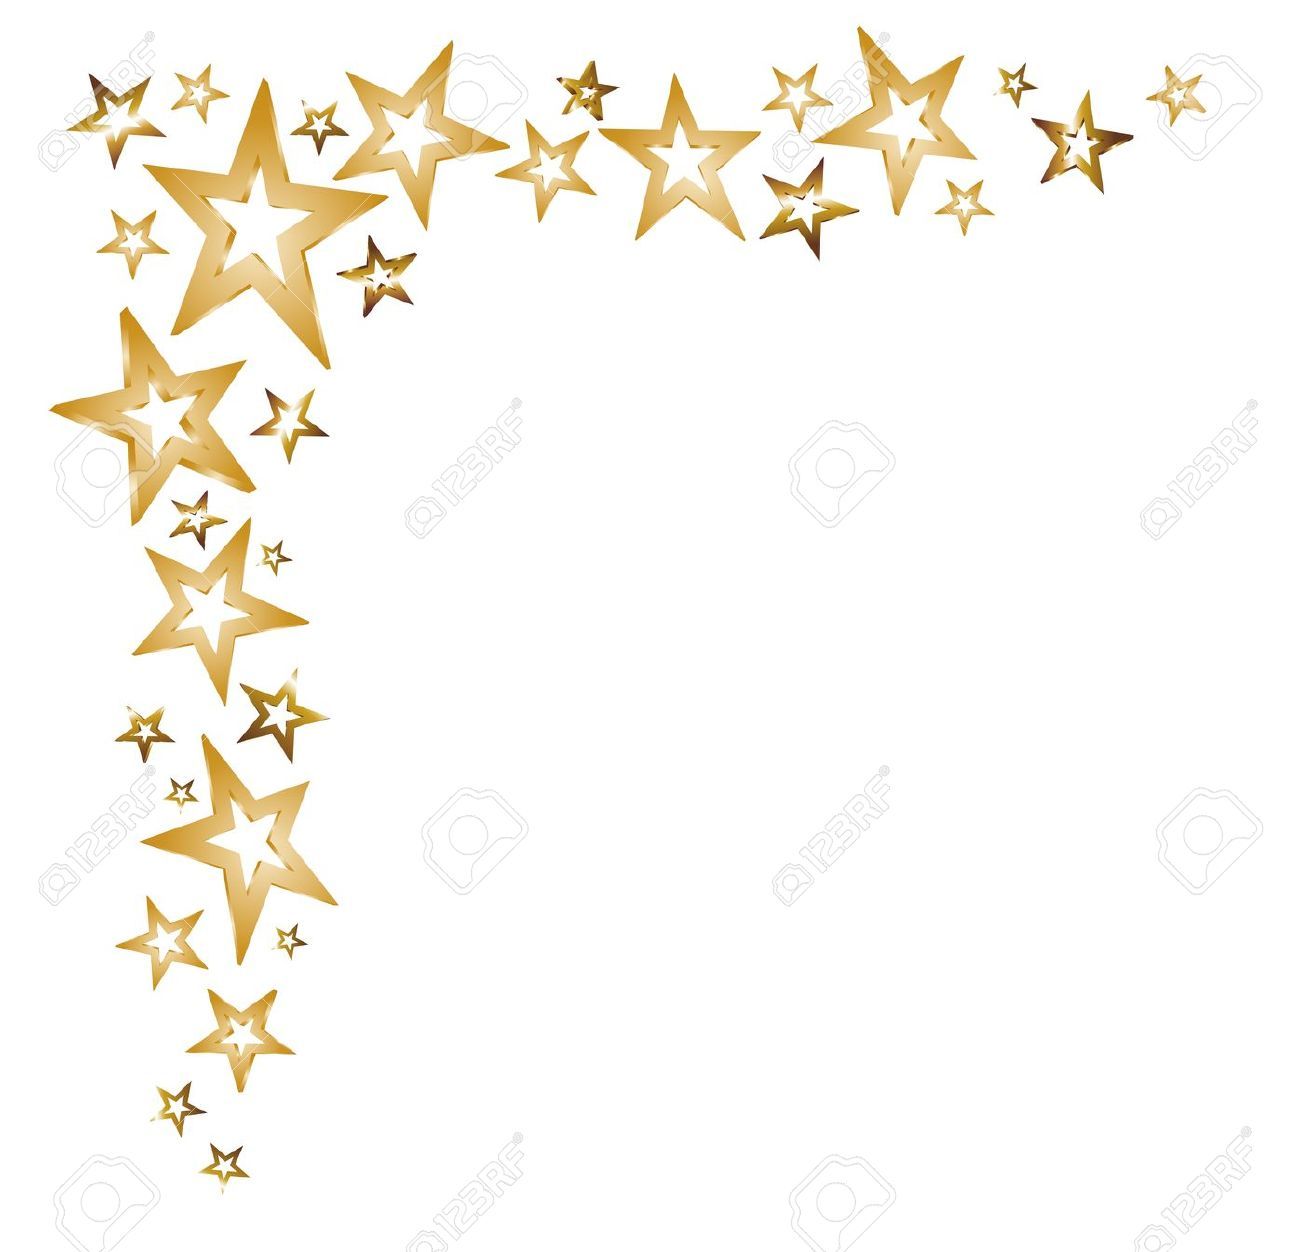 Gold shooting star clipart